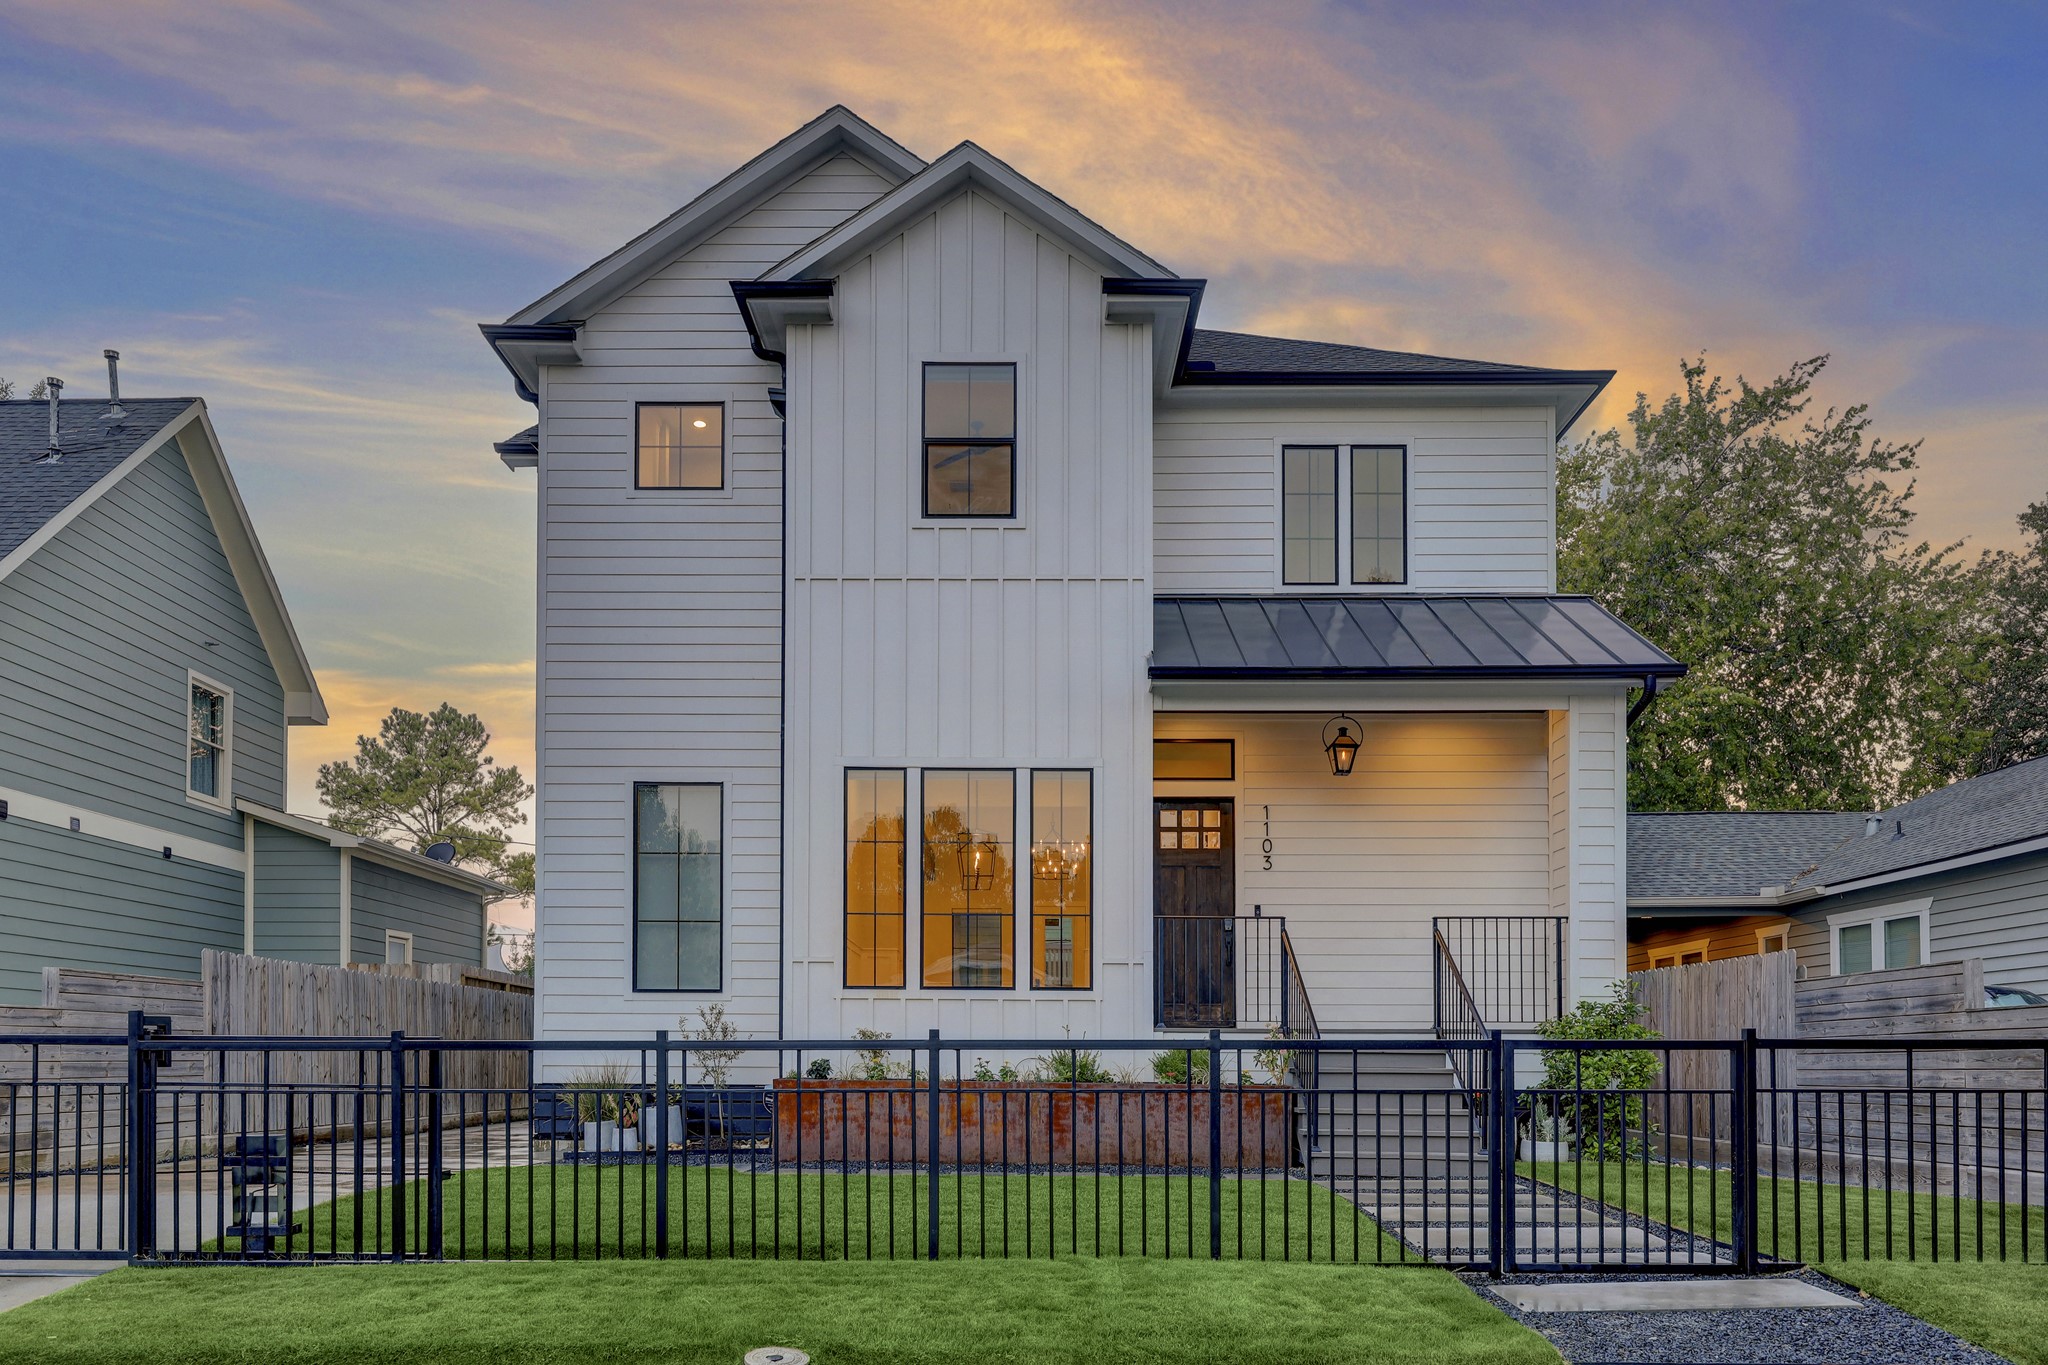 Welcome home to 1103 Tabor! A modern 'farmhouse' with elegant appointments!